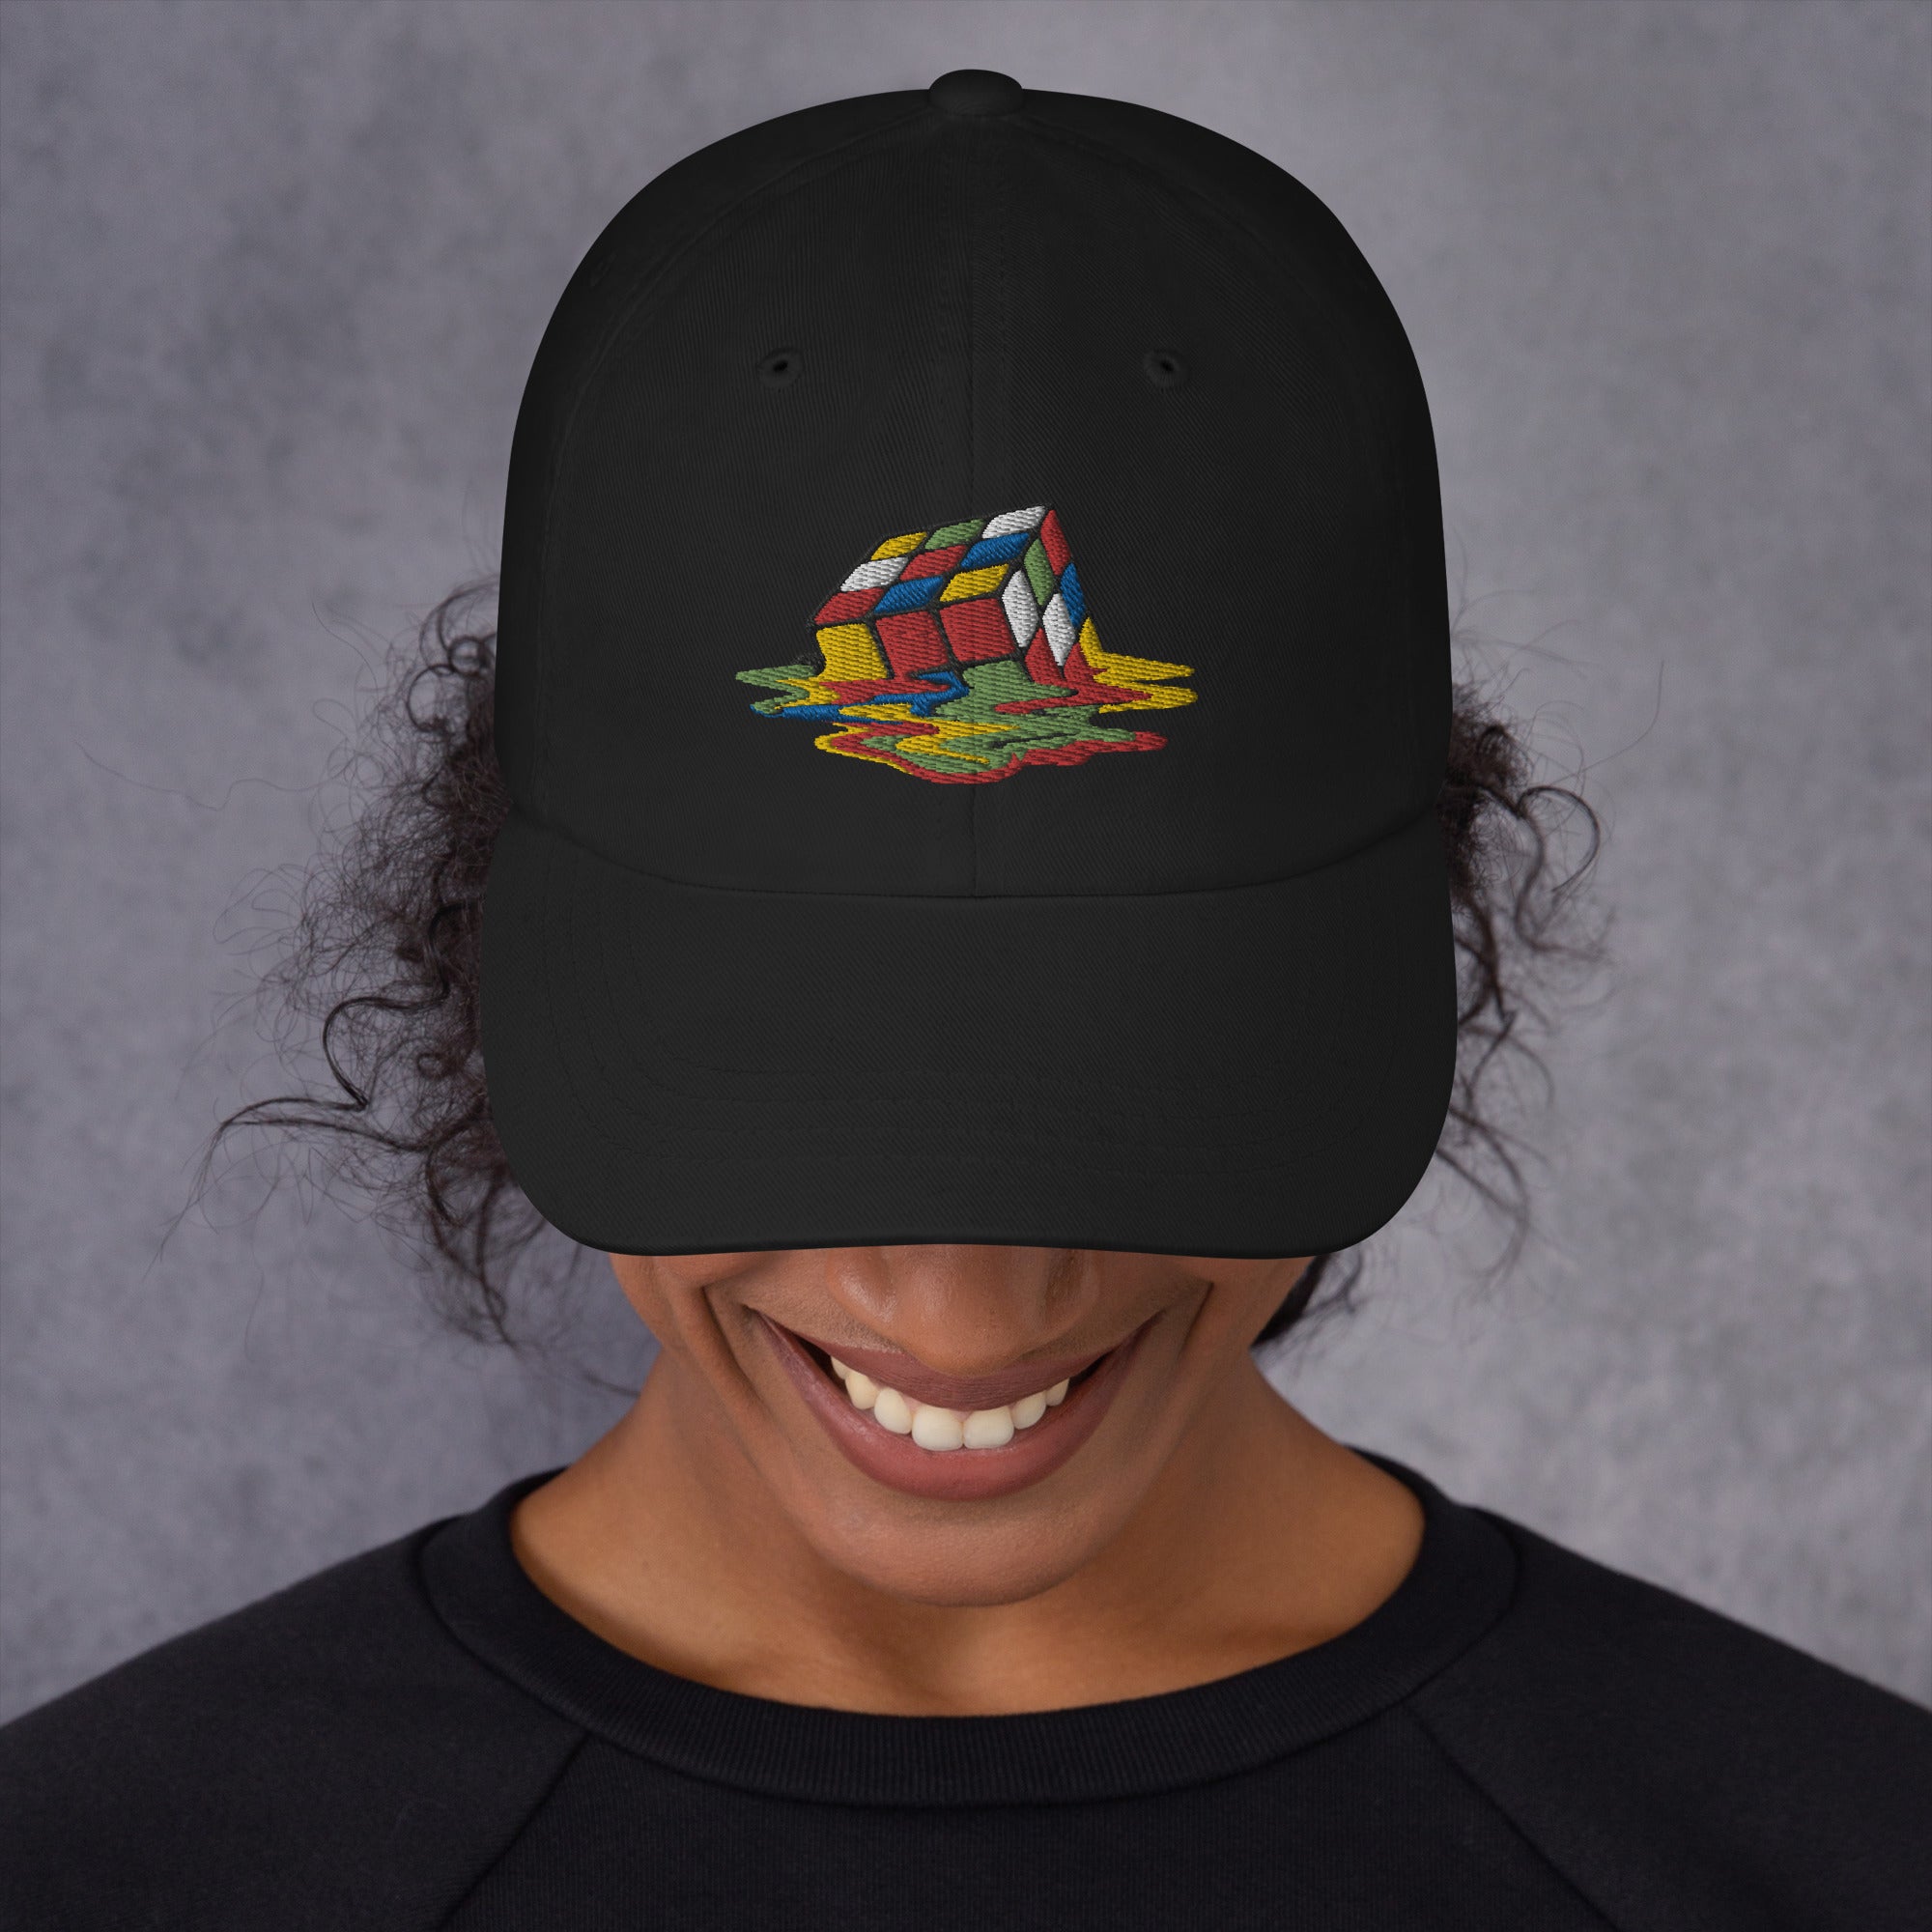 Melting Speed Cube Gaming Puzzle Box Embroidered Baseball Cap Rubik's Cube Dad hat - Edge of Life Designs